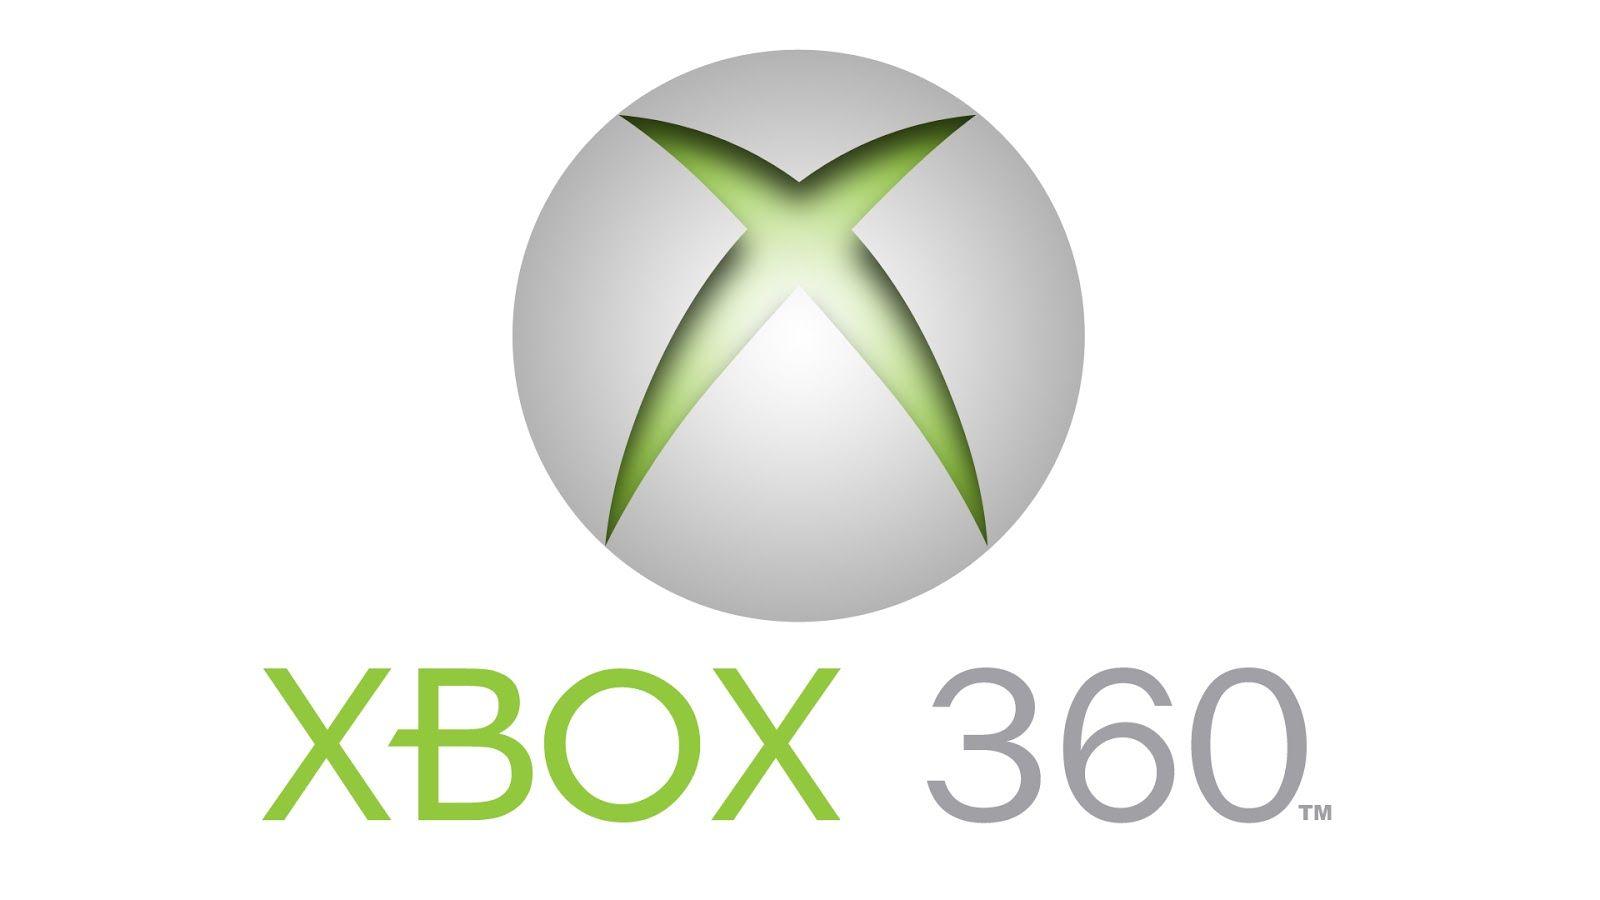 First Xbox Logo - Contributions of the Xbox 360 in Current and Next Generation Consoles